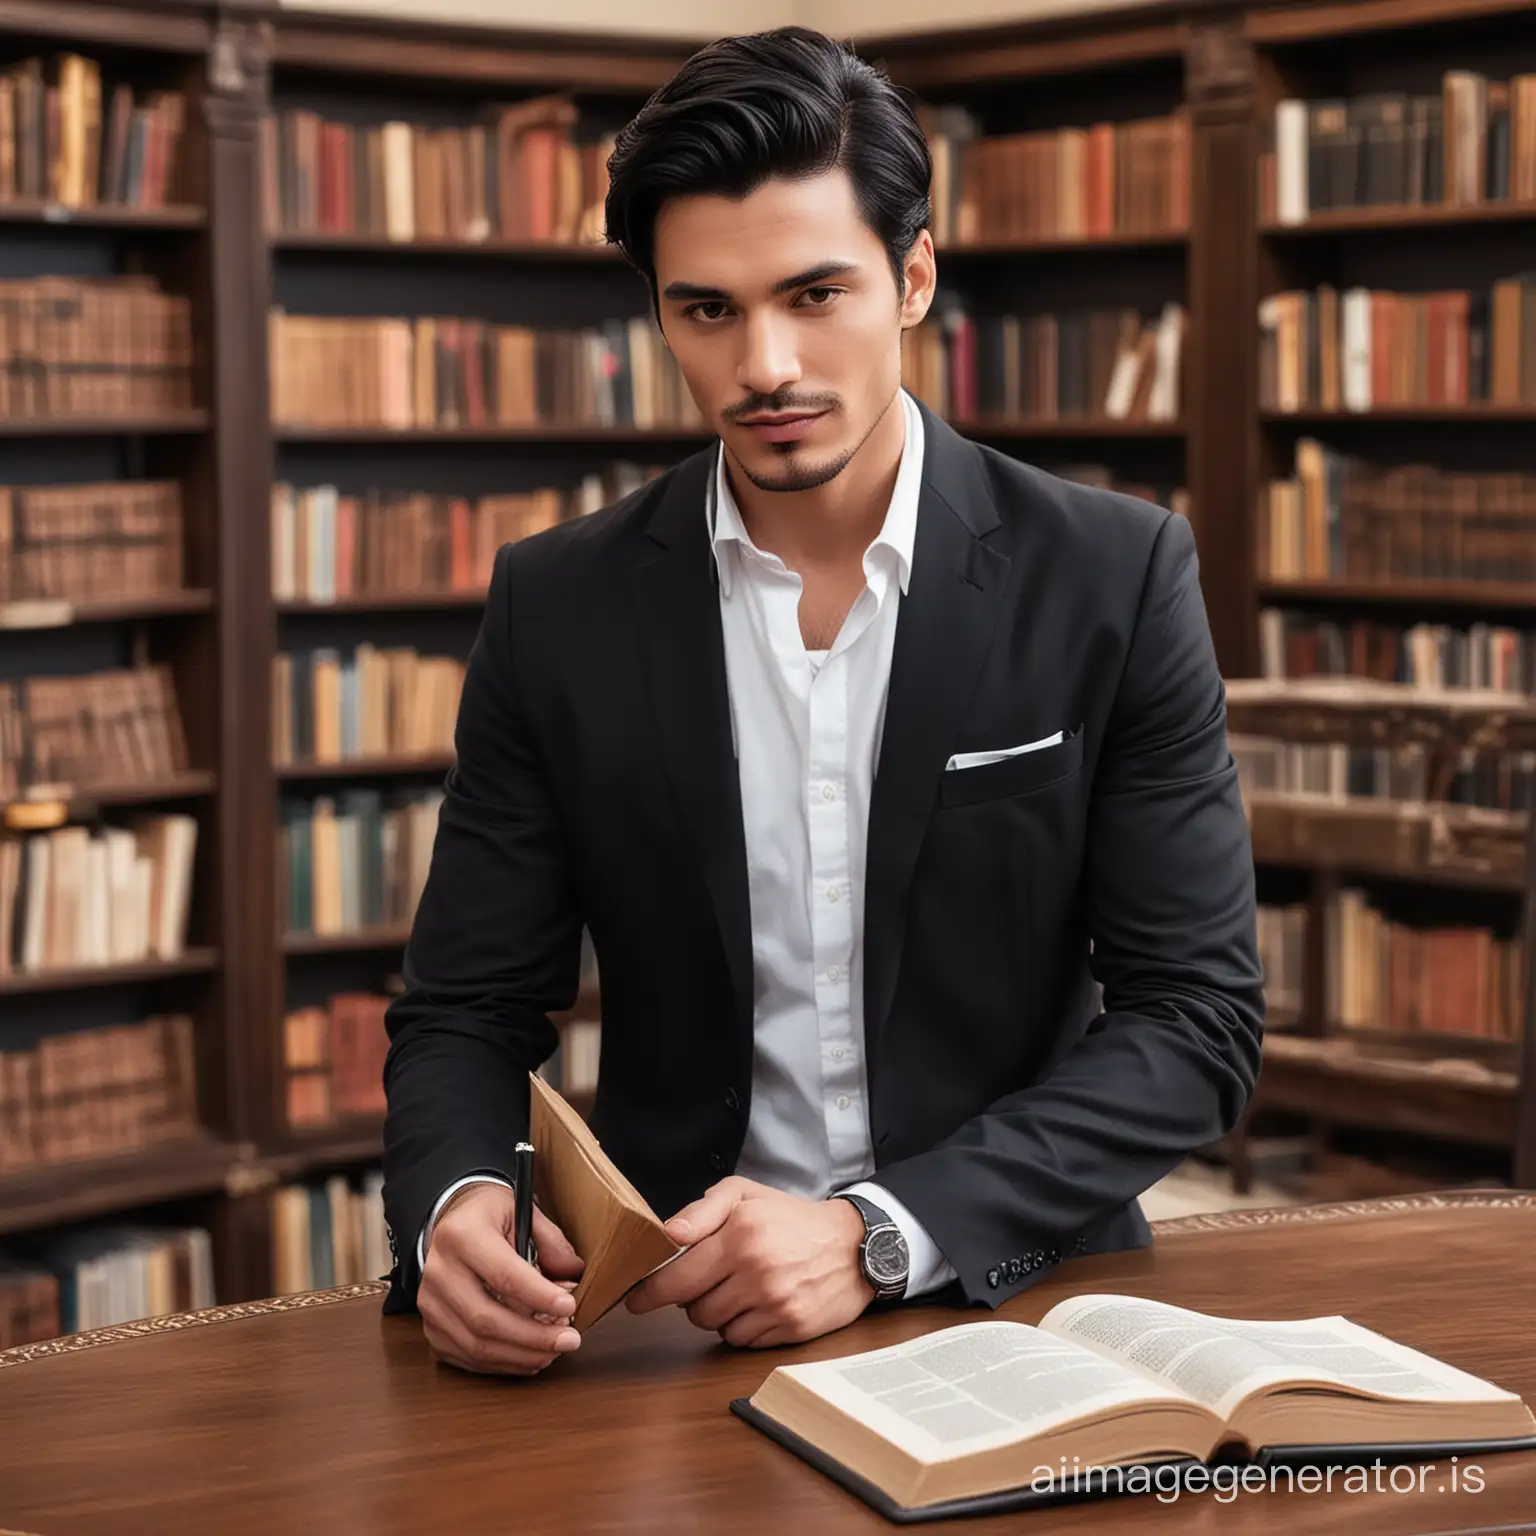 Stylish-Man-with-Book-in-Opulent-Library